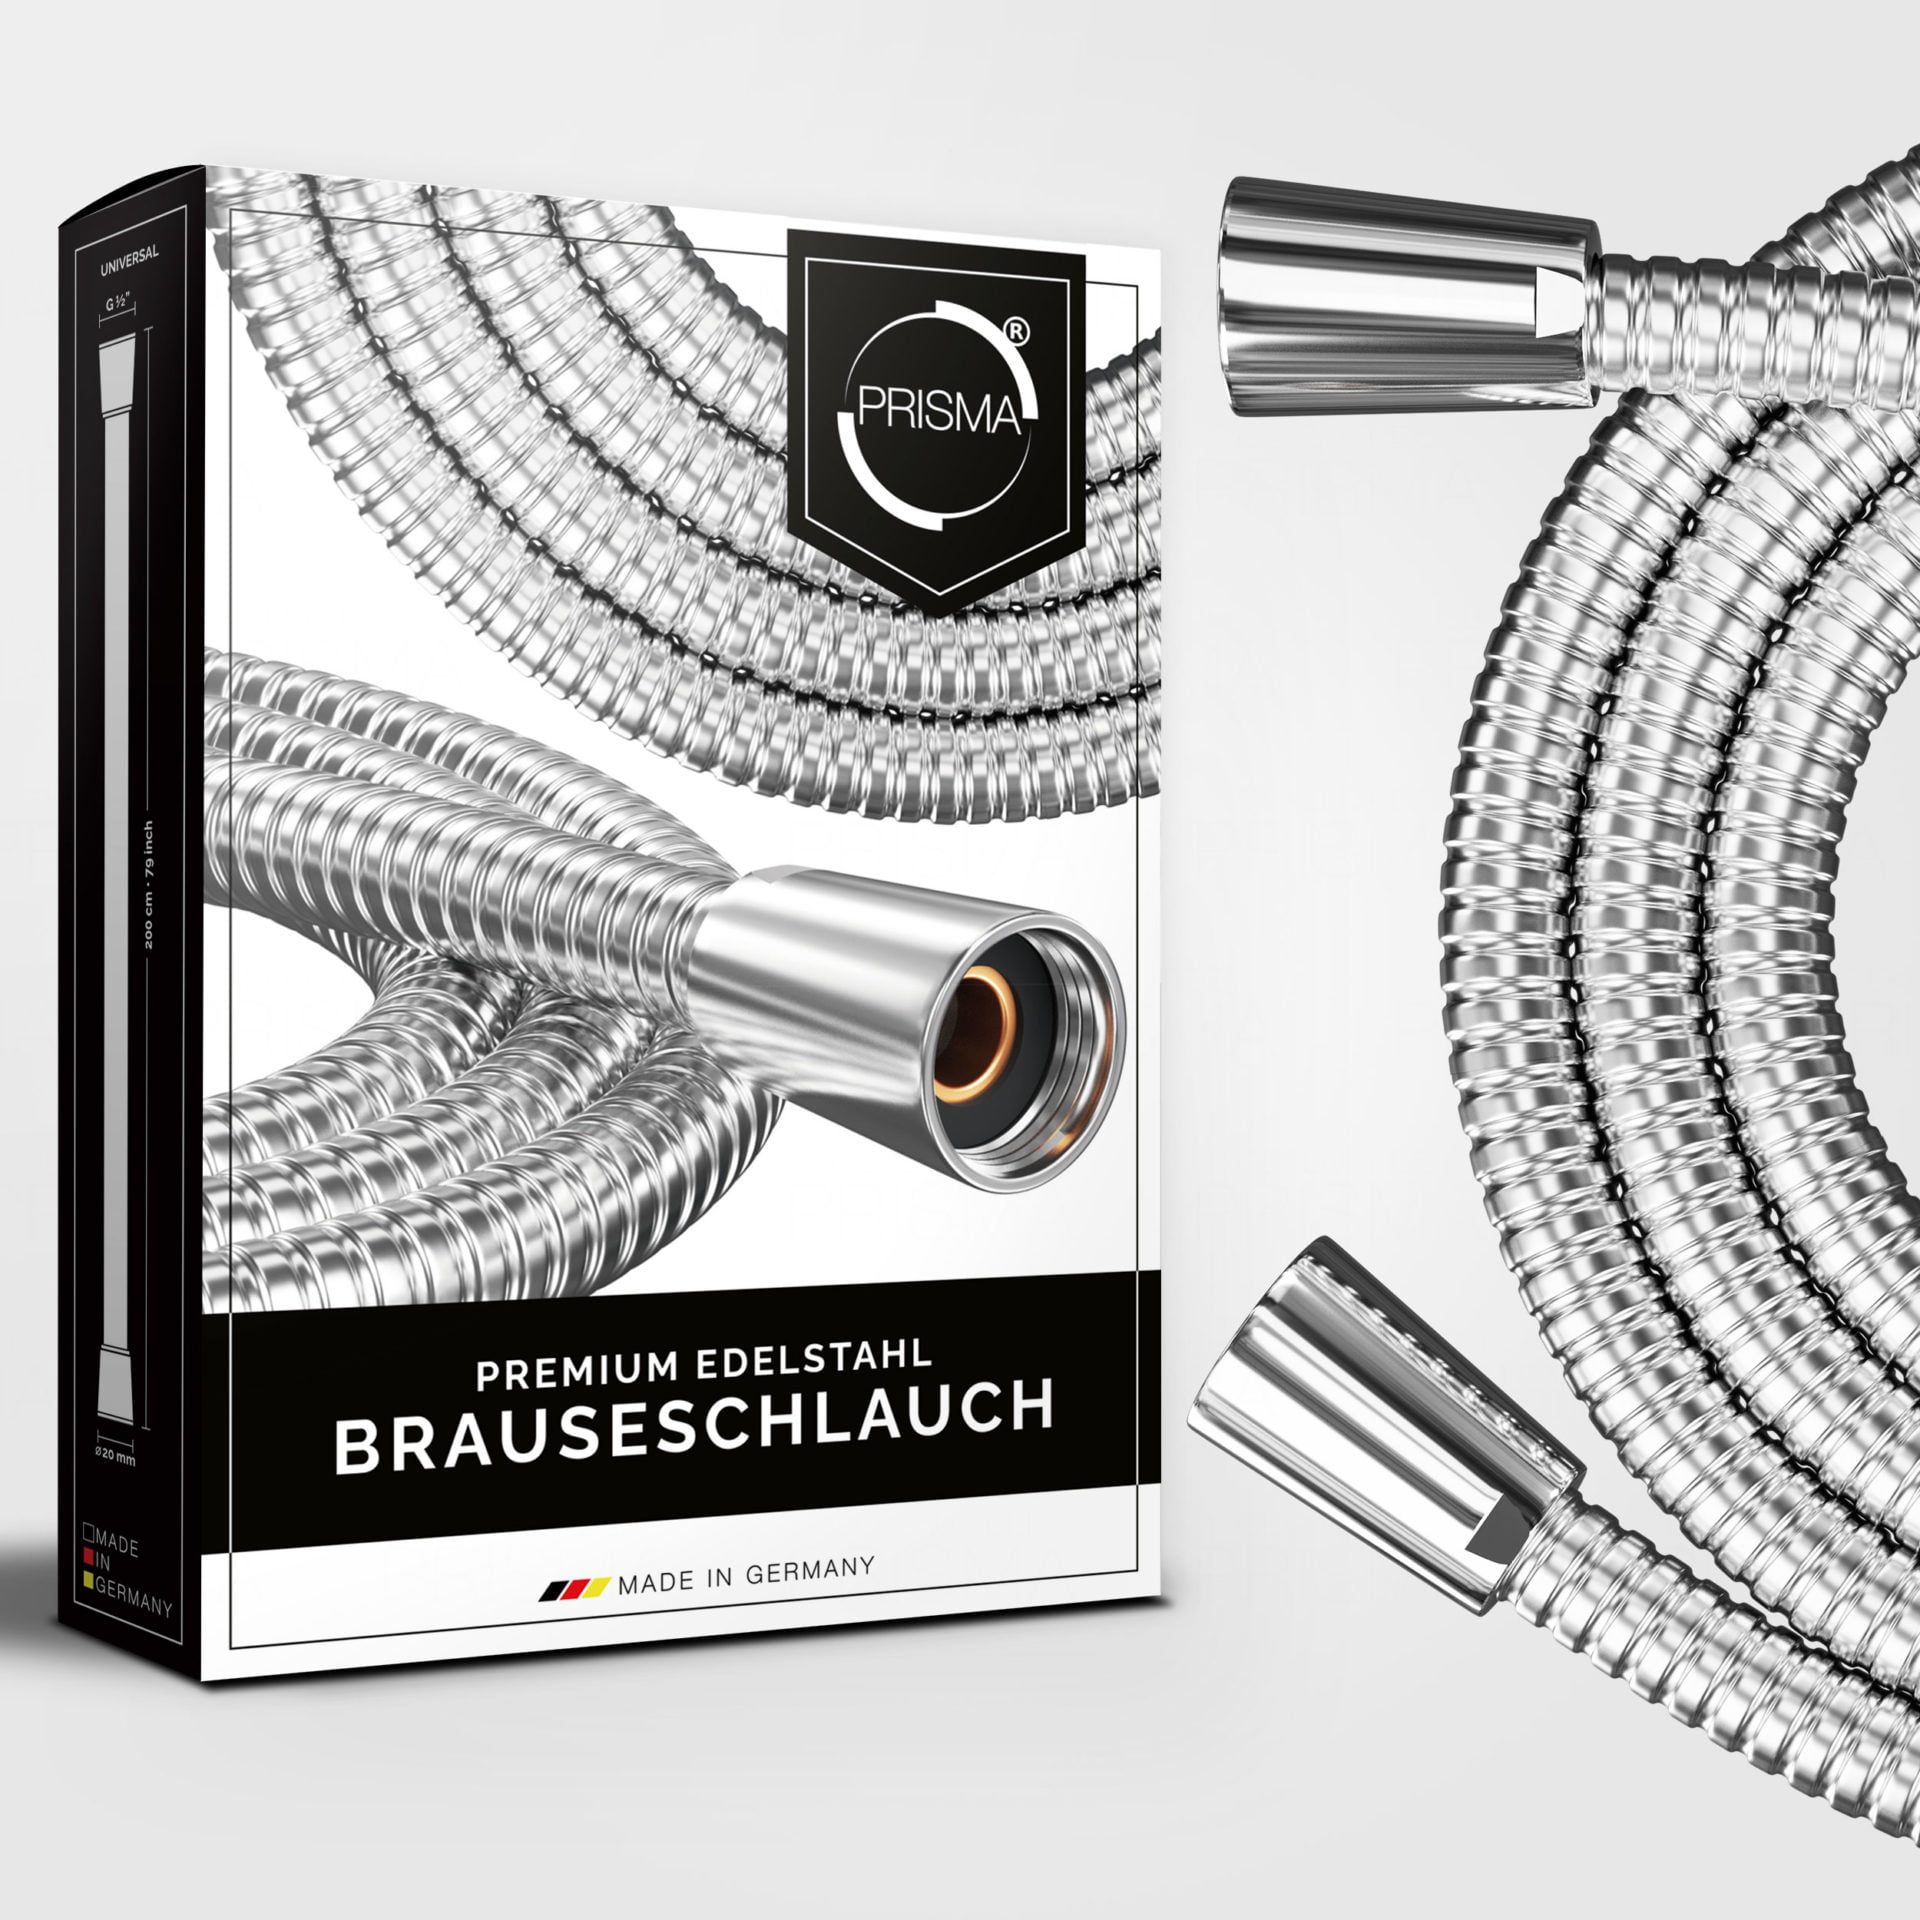 3977 Product - PRISMA Brauseschlauch aus Edelstahl • Made In Germany